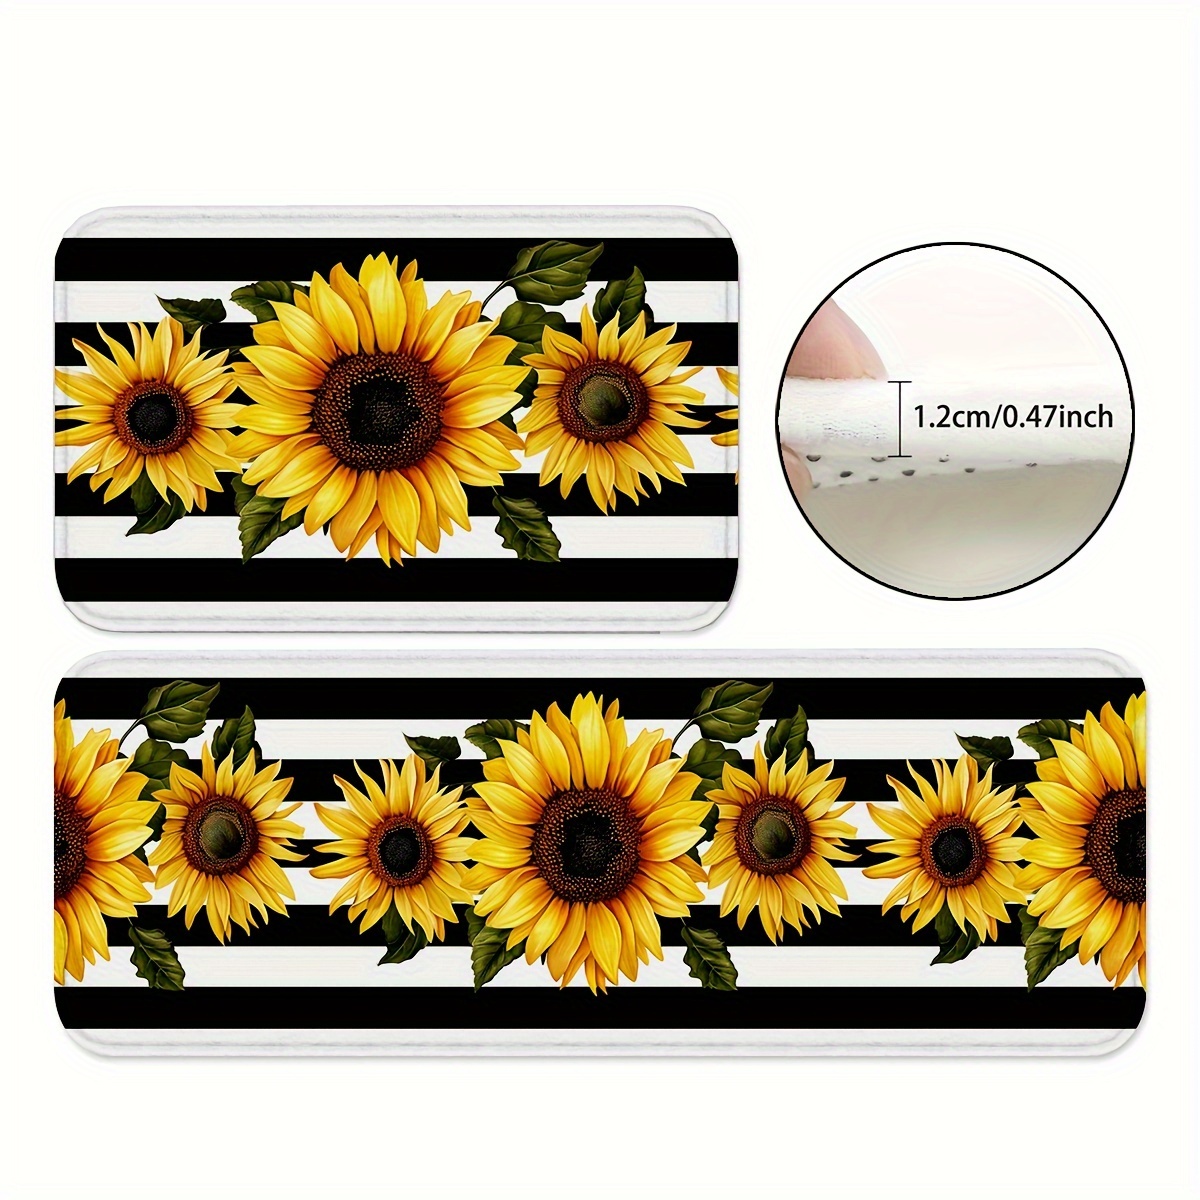 

1/2pcs, Farmhouse Area Rug, Sunflower 1.2cm Kitchen Rugs And Mats Non Skid Washable Absorbent Microfiber Kitchen Mat For Floor, Non-shed, Non-slip, Family & Pet Friendly - Premium Recycled Fibers